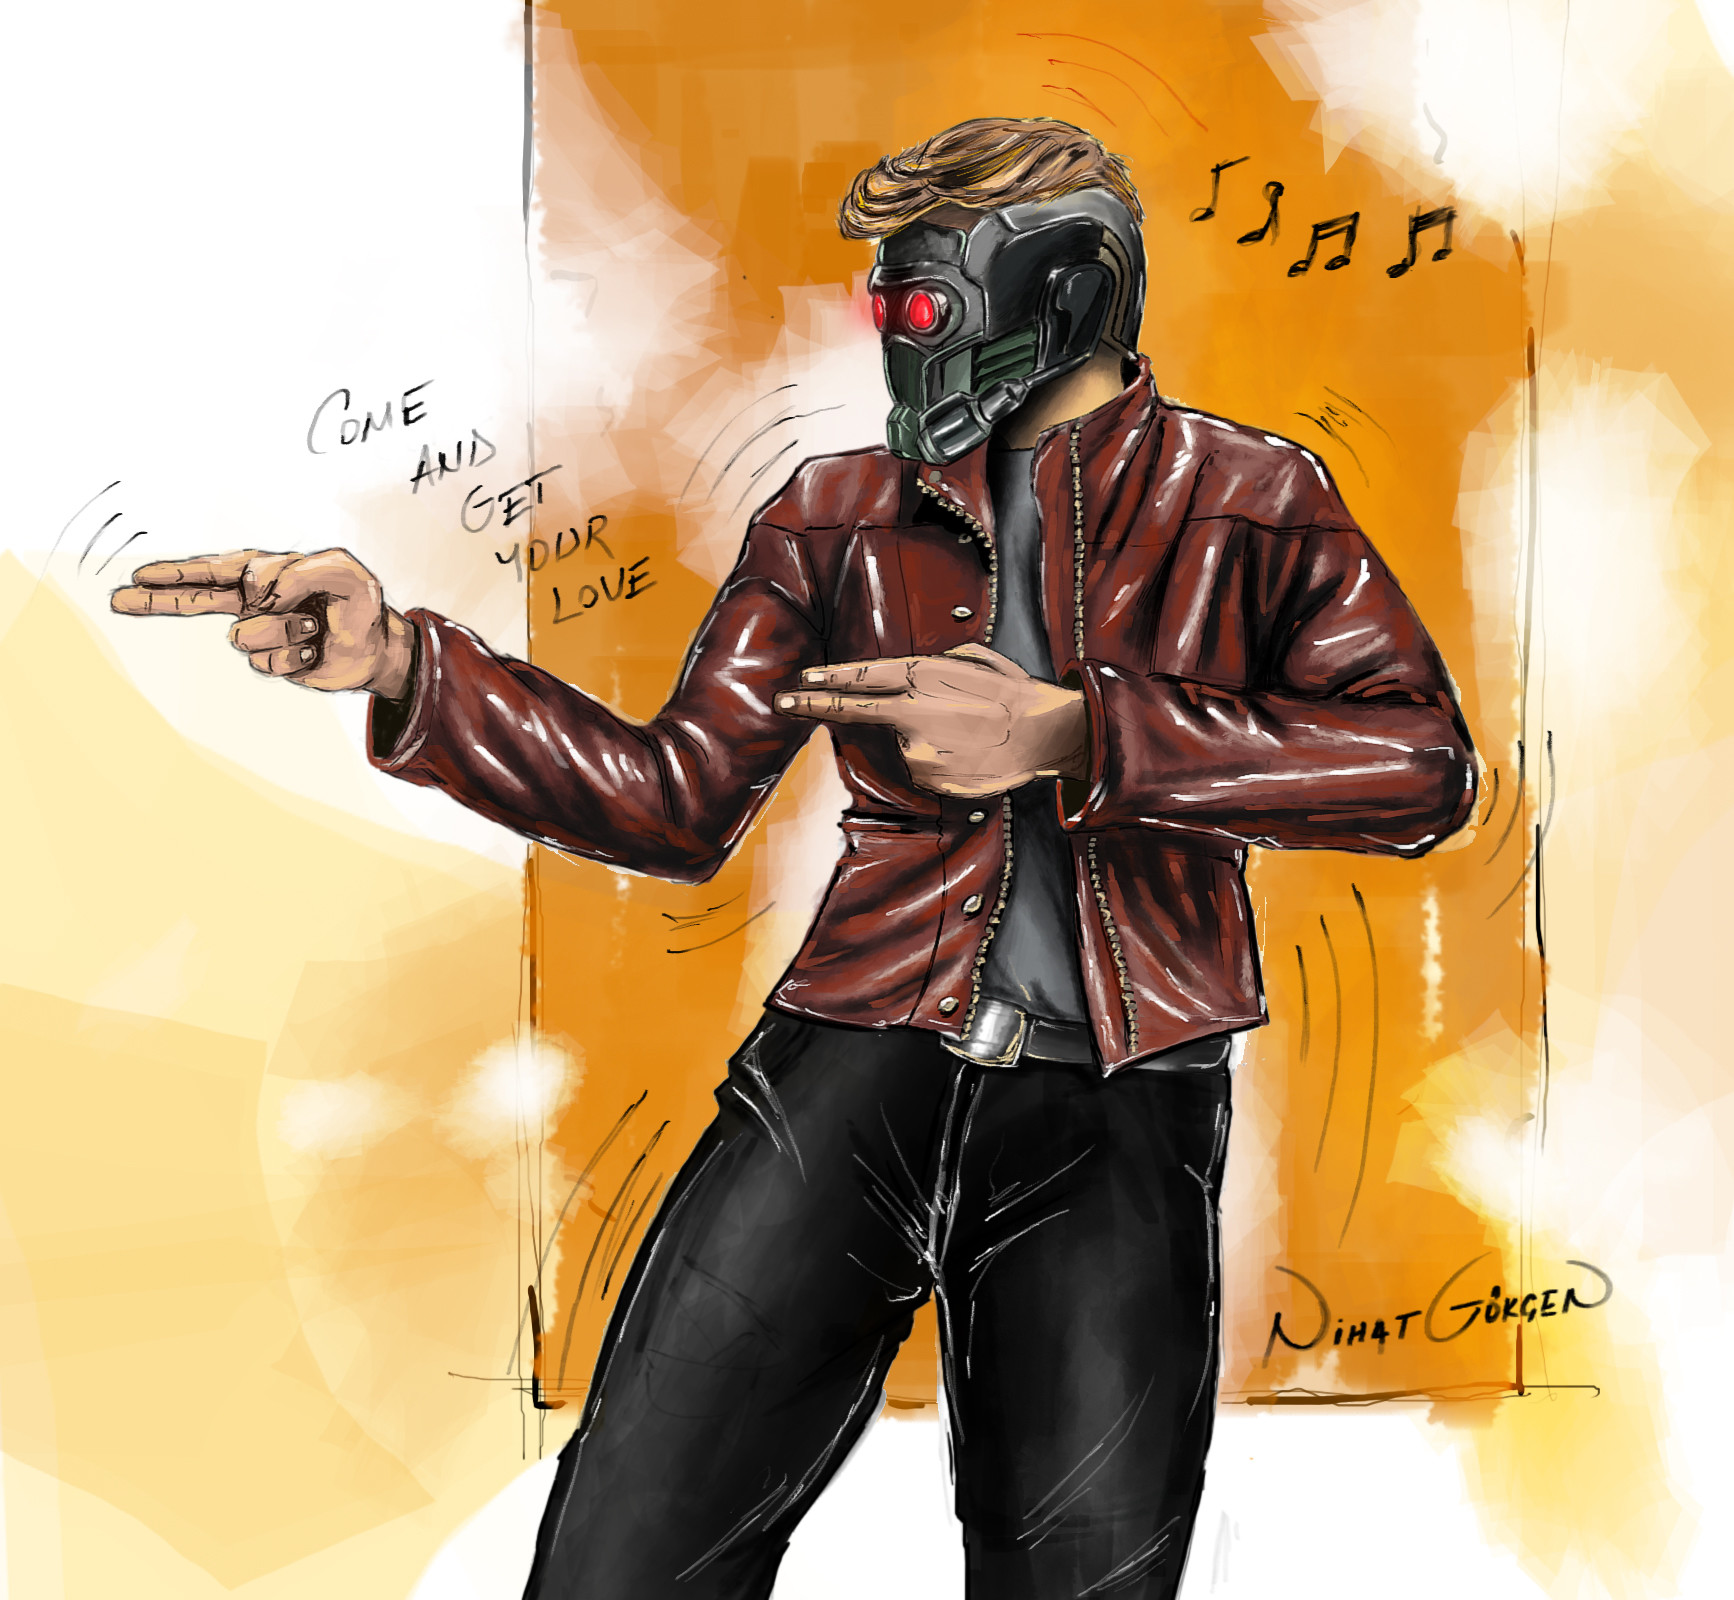 Peter Quill - Star Lord.